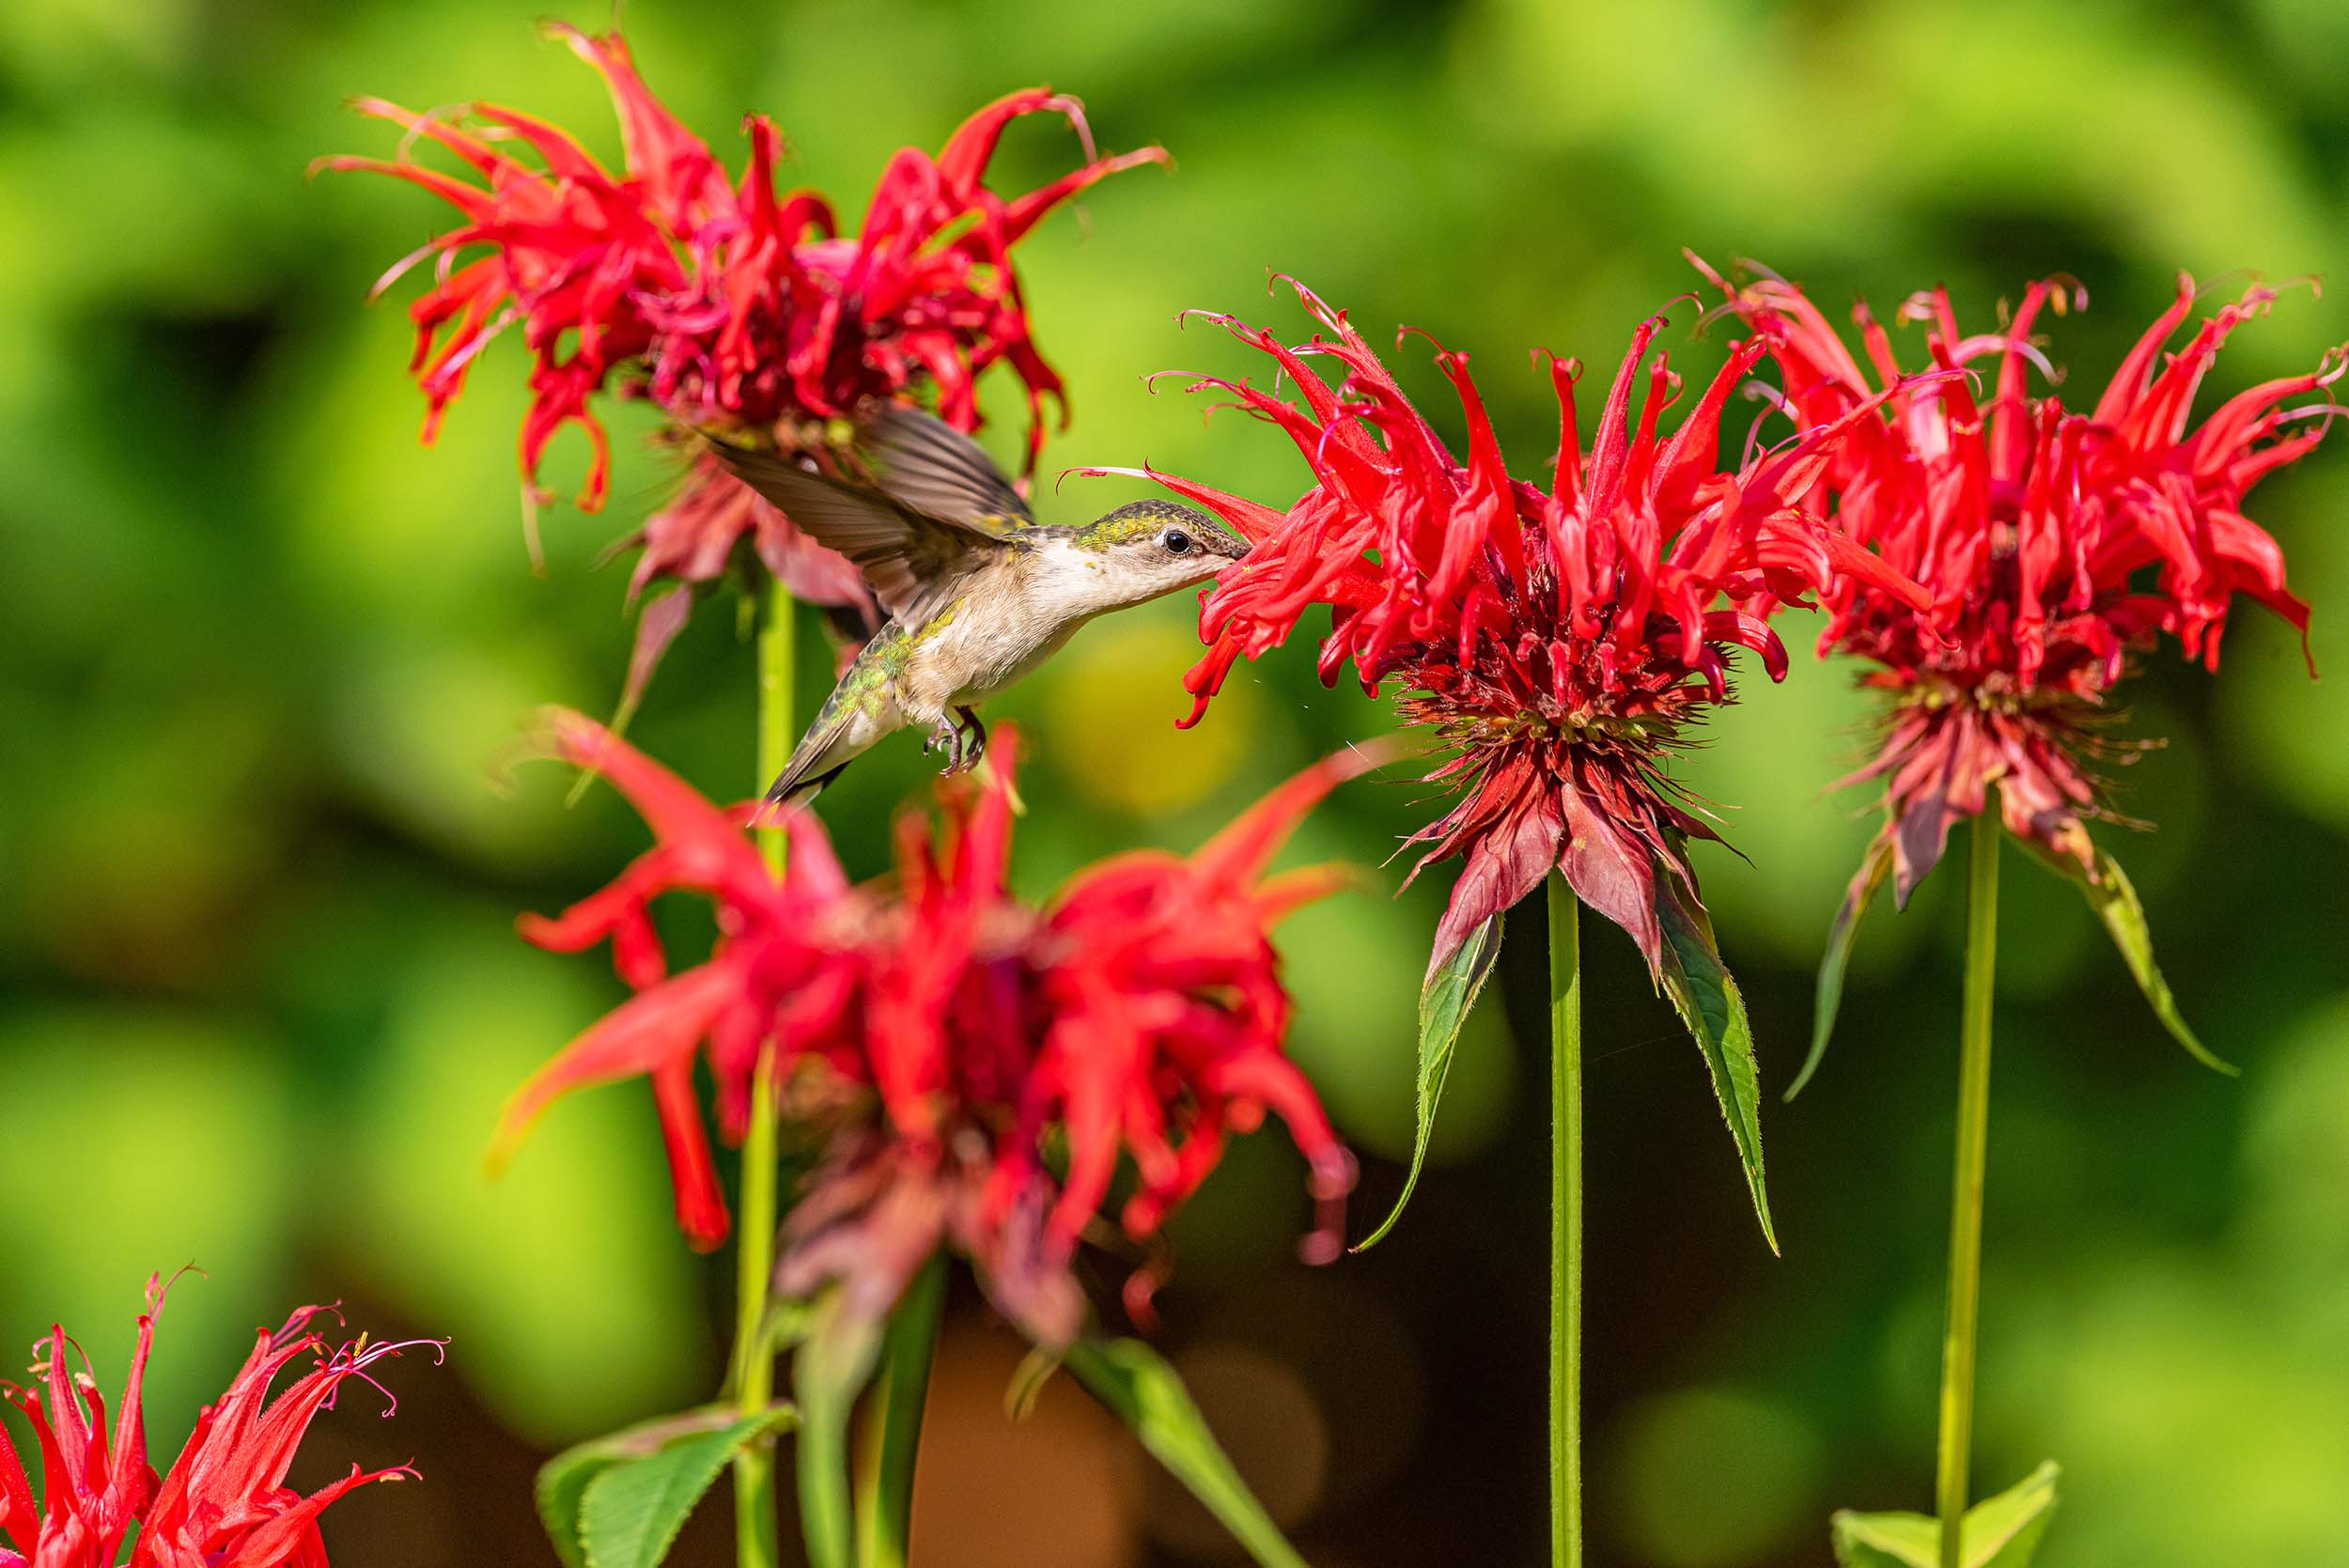 A hummingbird drinking from bright-red flowers